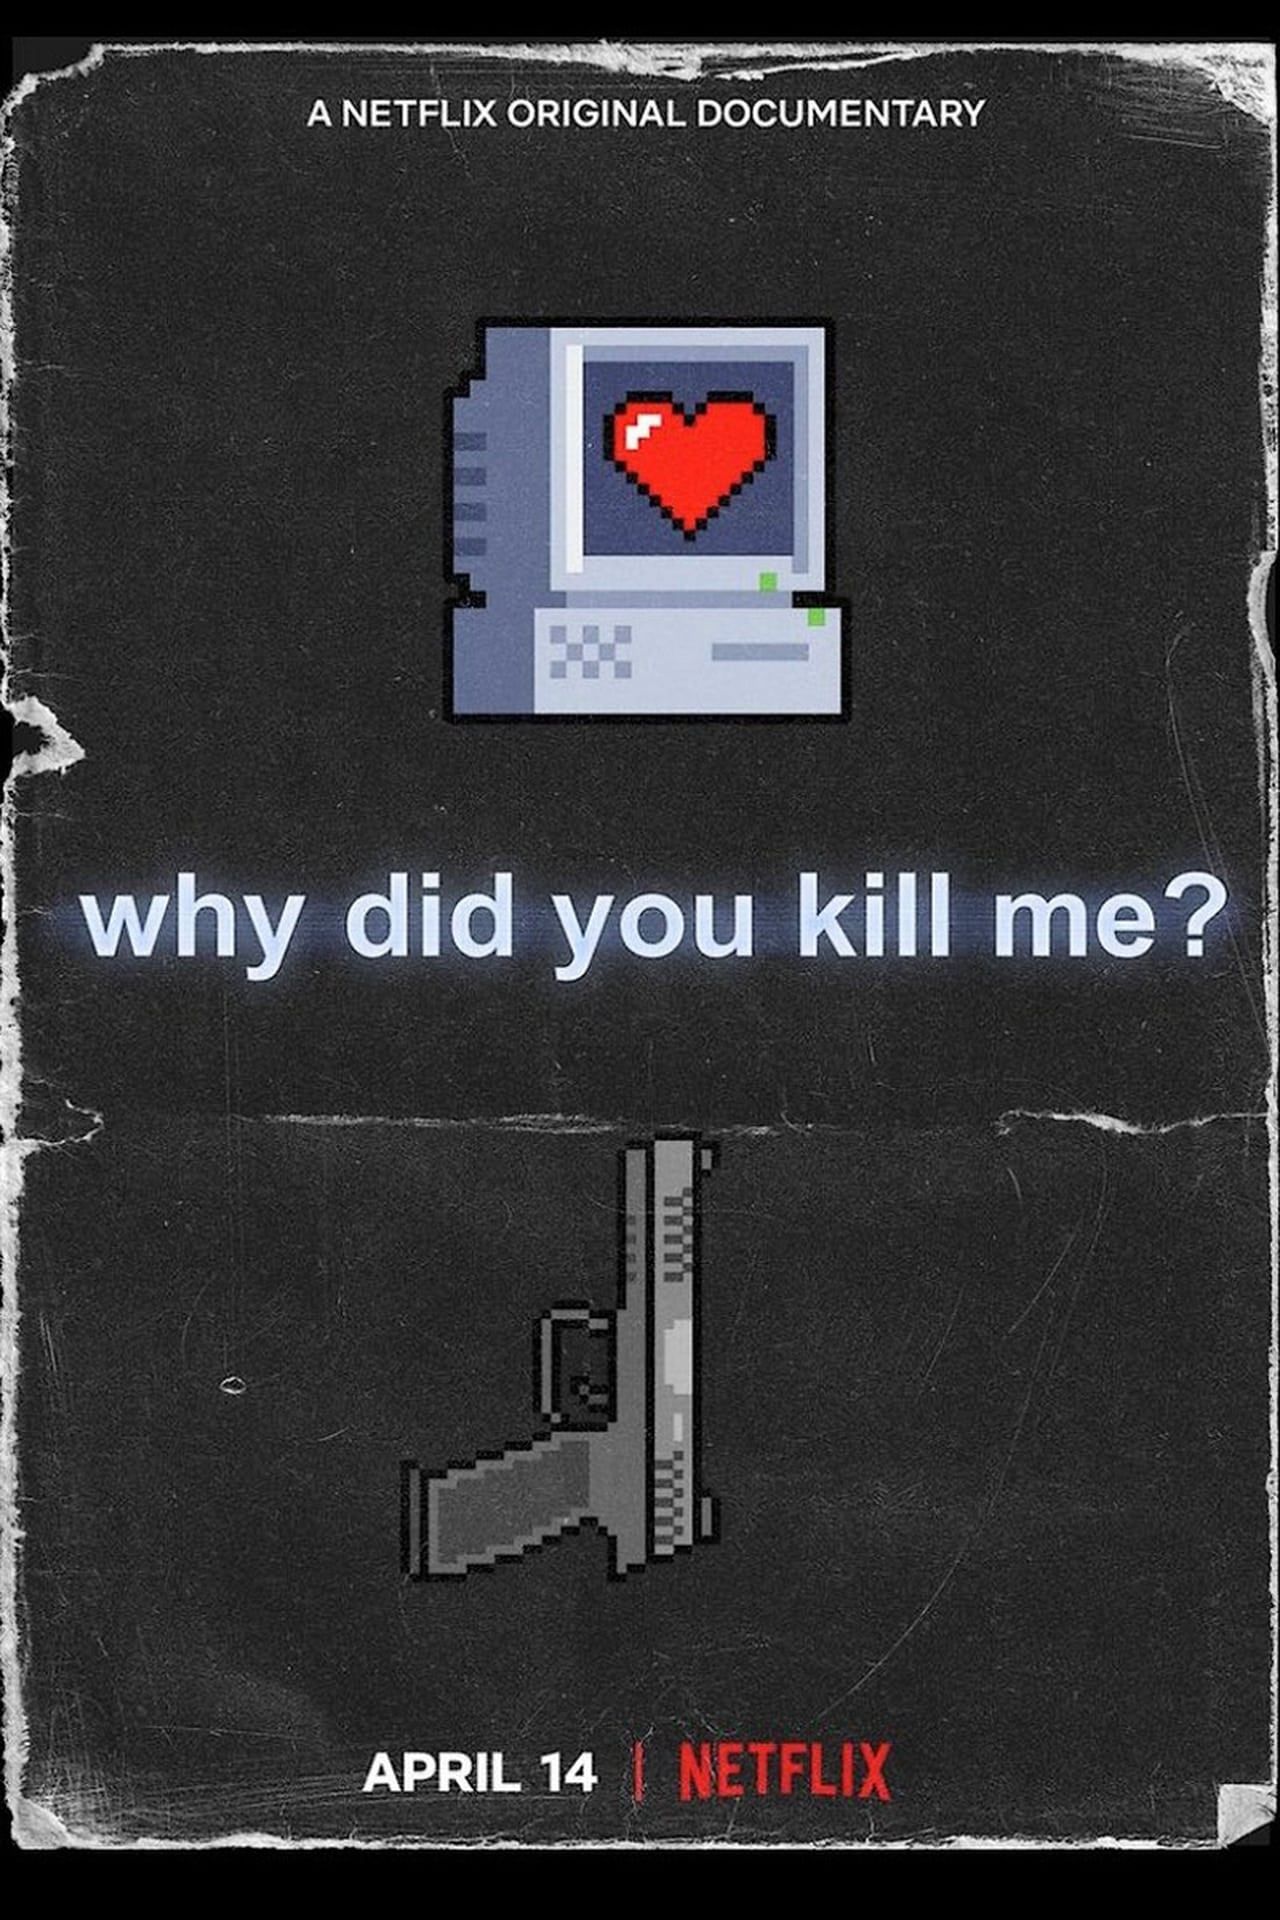 Why Did You Kill Me? (2021) Poster Showing a 8bit Gun Pointing at a Computer